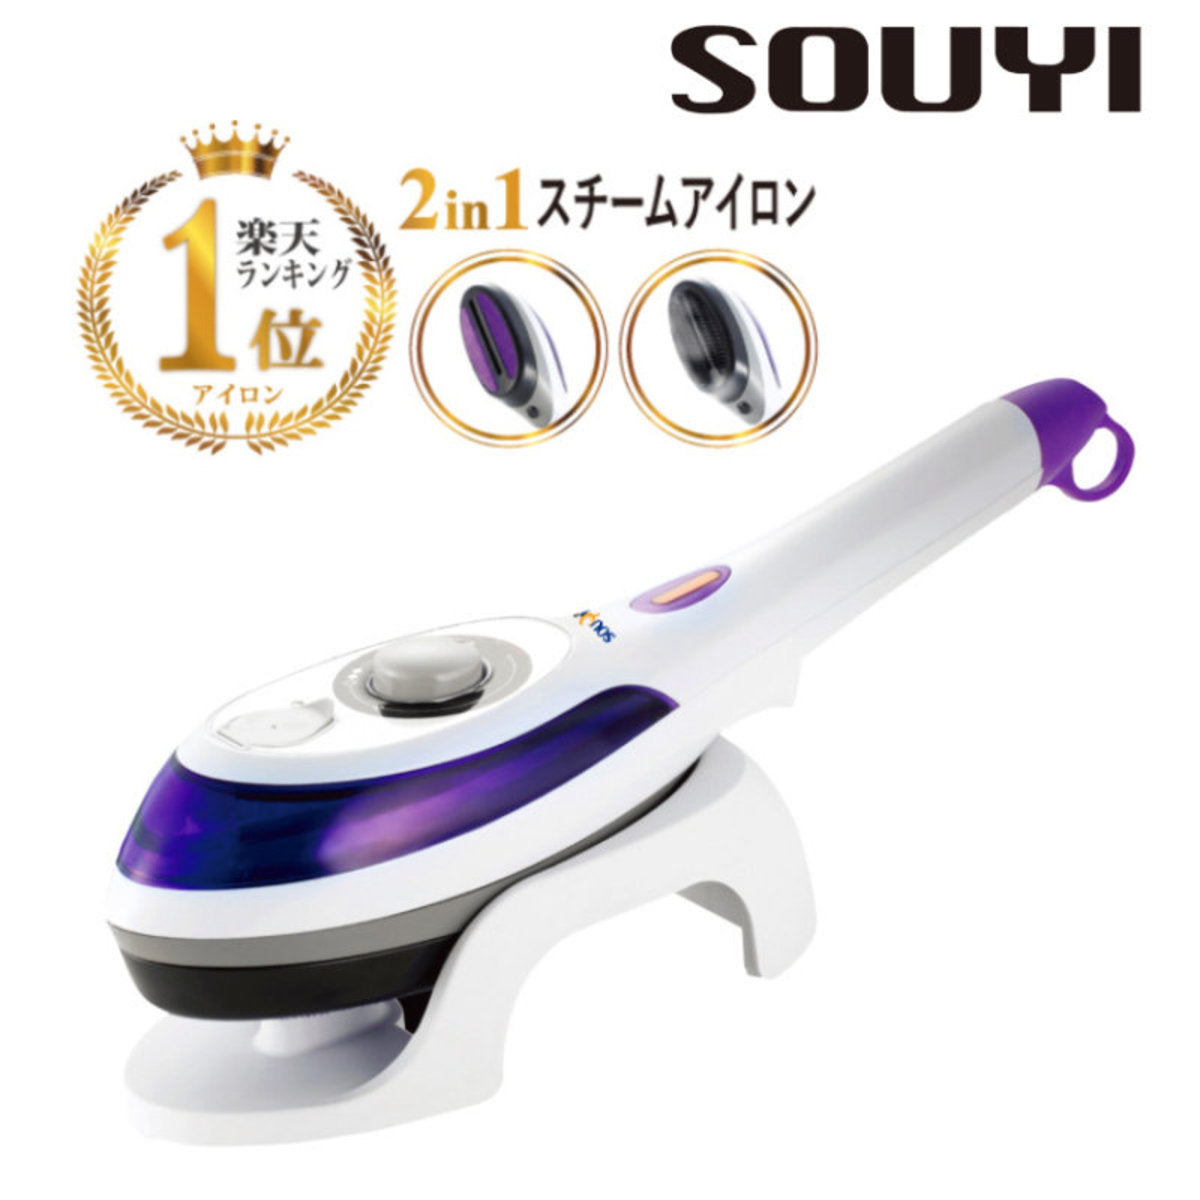 Souyi - SY-066 Portable Steam Jet Iron [Licensed in Hong Kong]